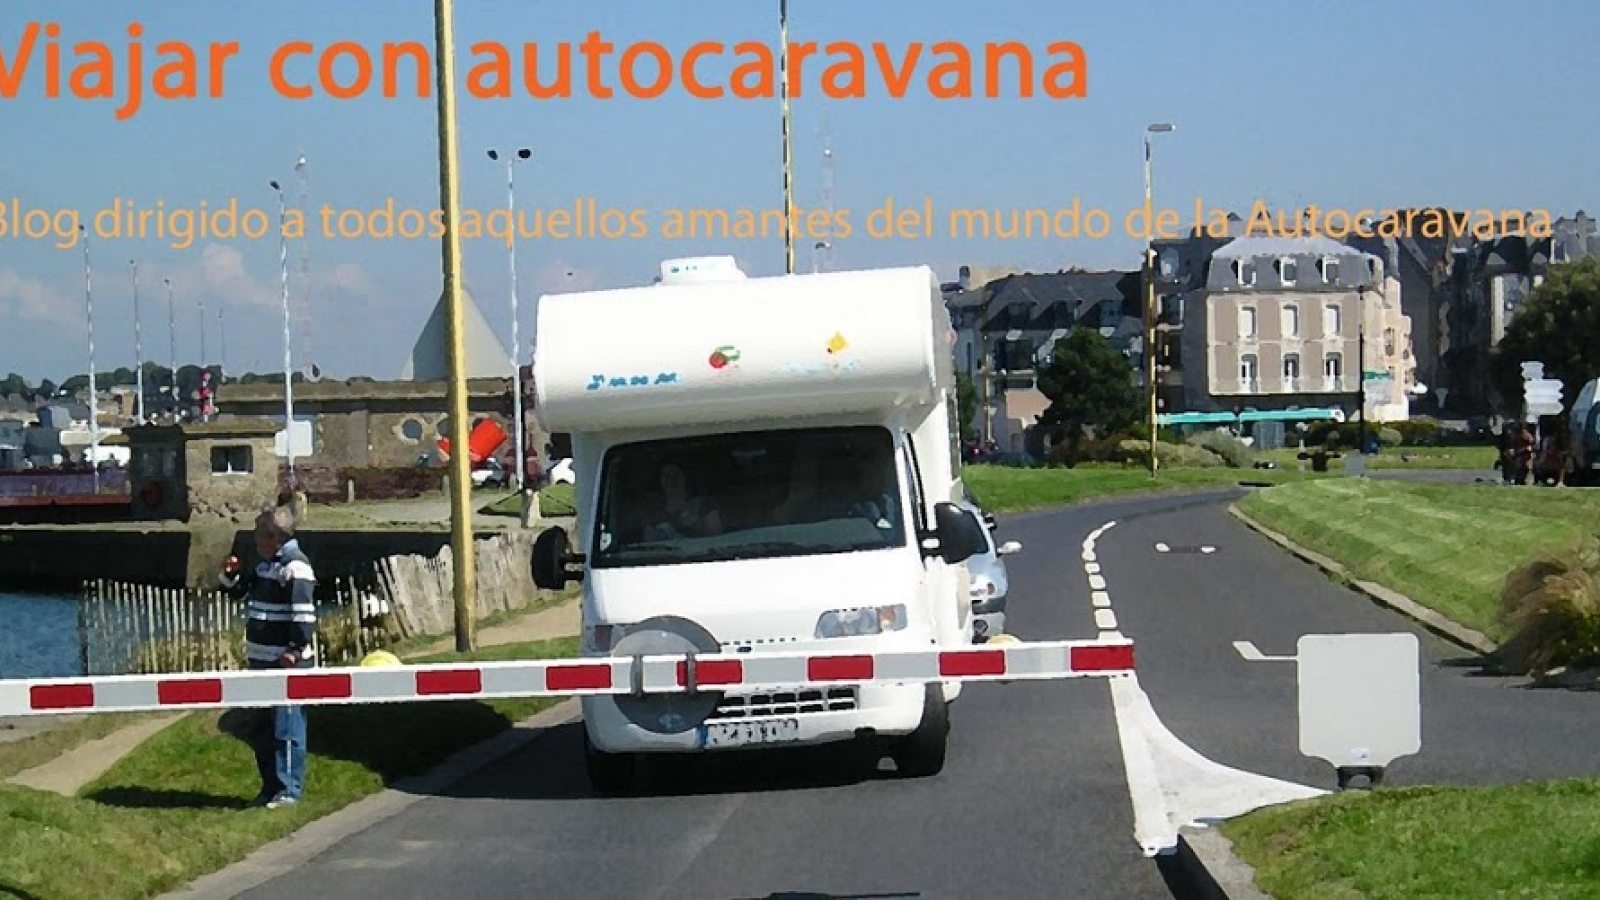 MITORTUGA.ES LIKES TO TRAVEL WITH A MOTORHOME